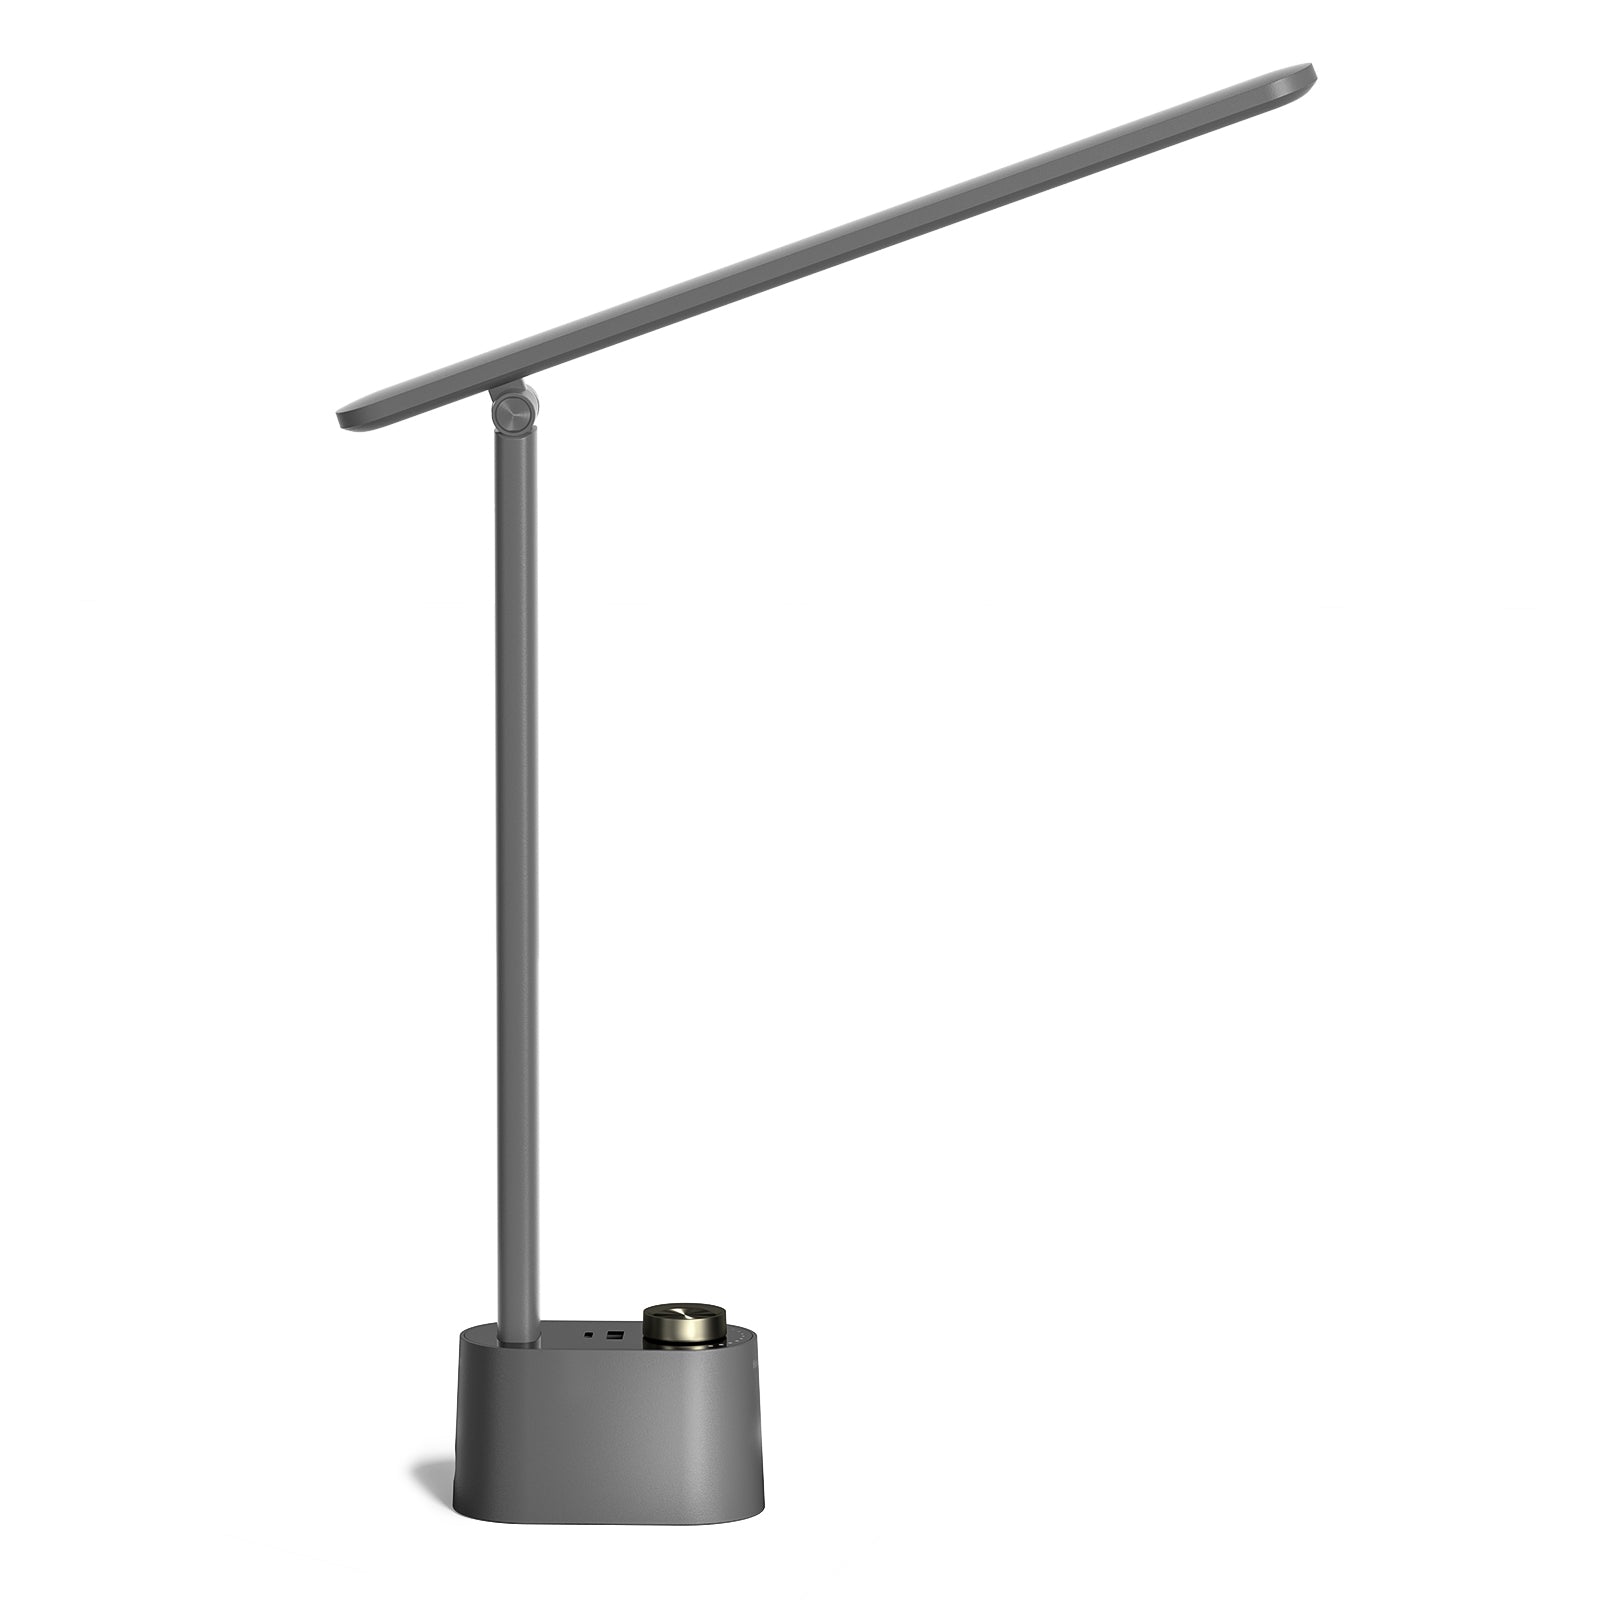 Honeywell Desk Lamp Home Office - Sunturalux™ H01 Eye Caring LED Lighting with USB A+C Charging Station